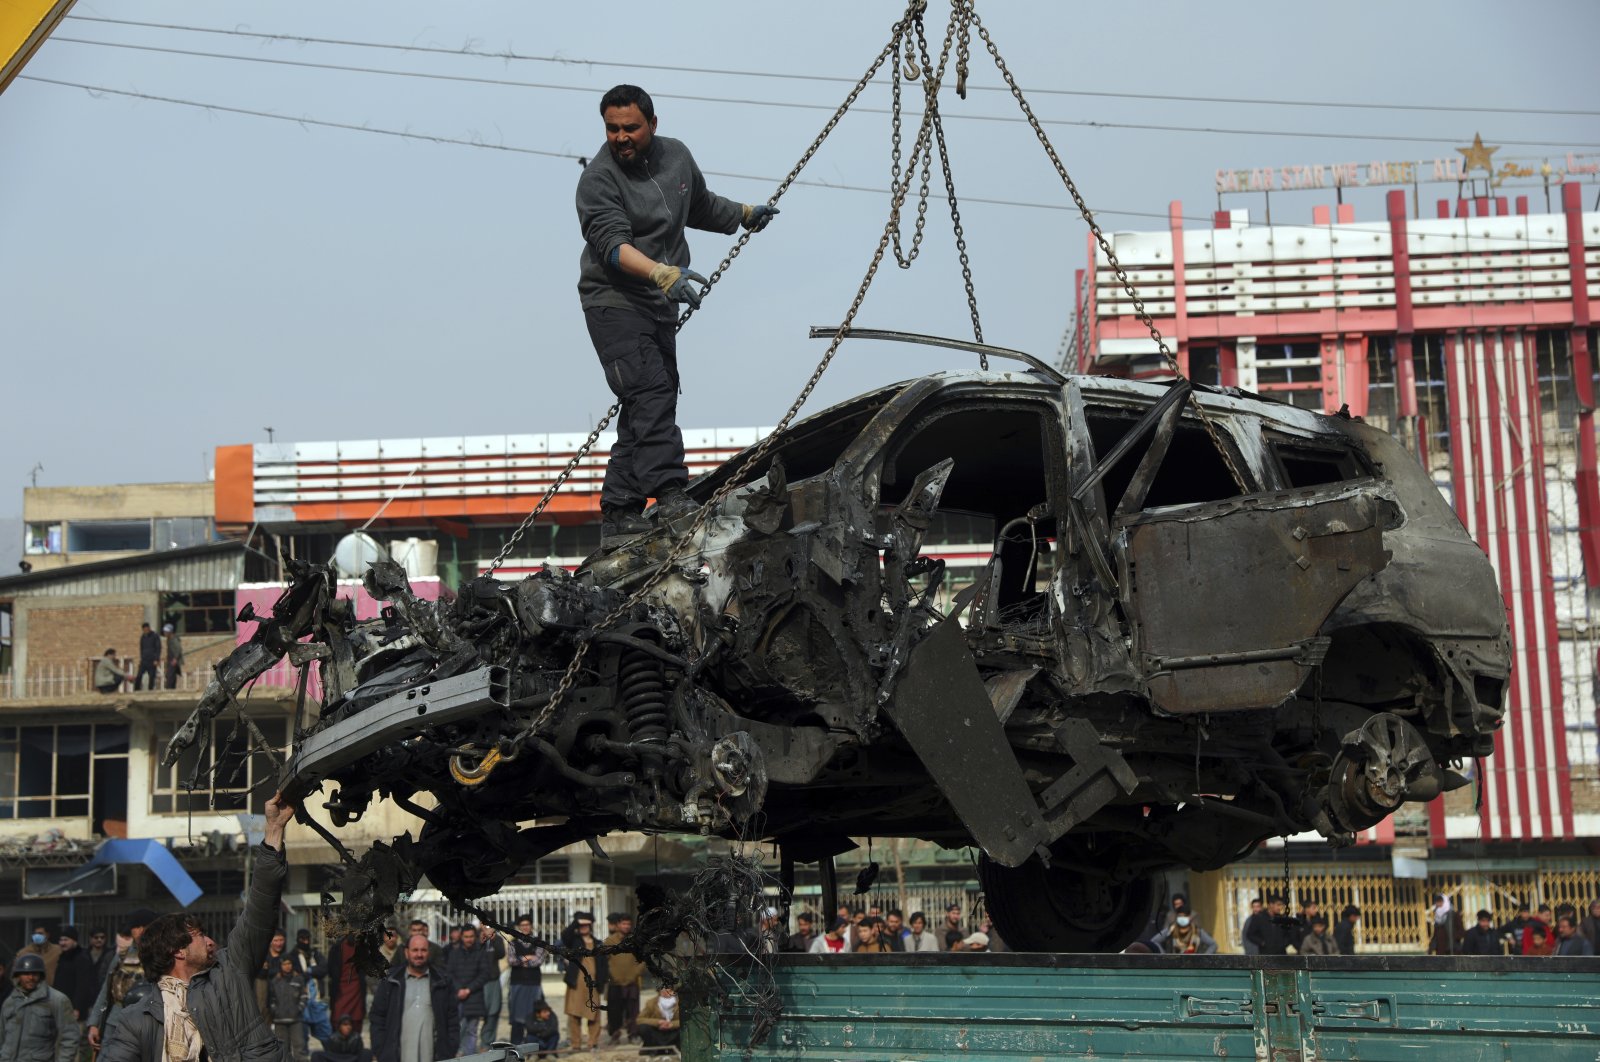 Afghan security personnel oversees the removal of damaged vehicles after a bombing in Kabul, Afghanistan, Dec. 20, 2020. (AP Photo)